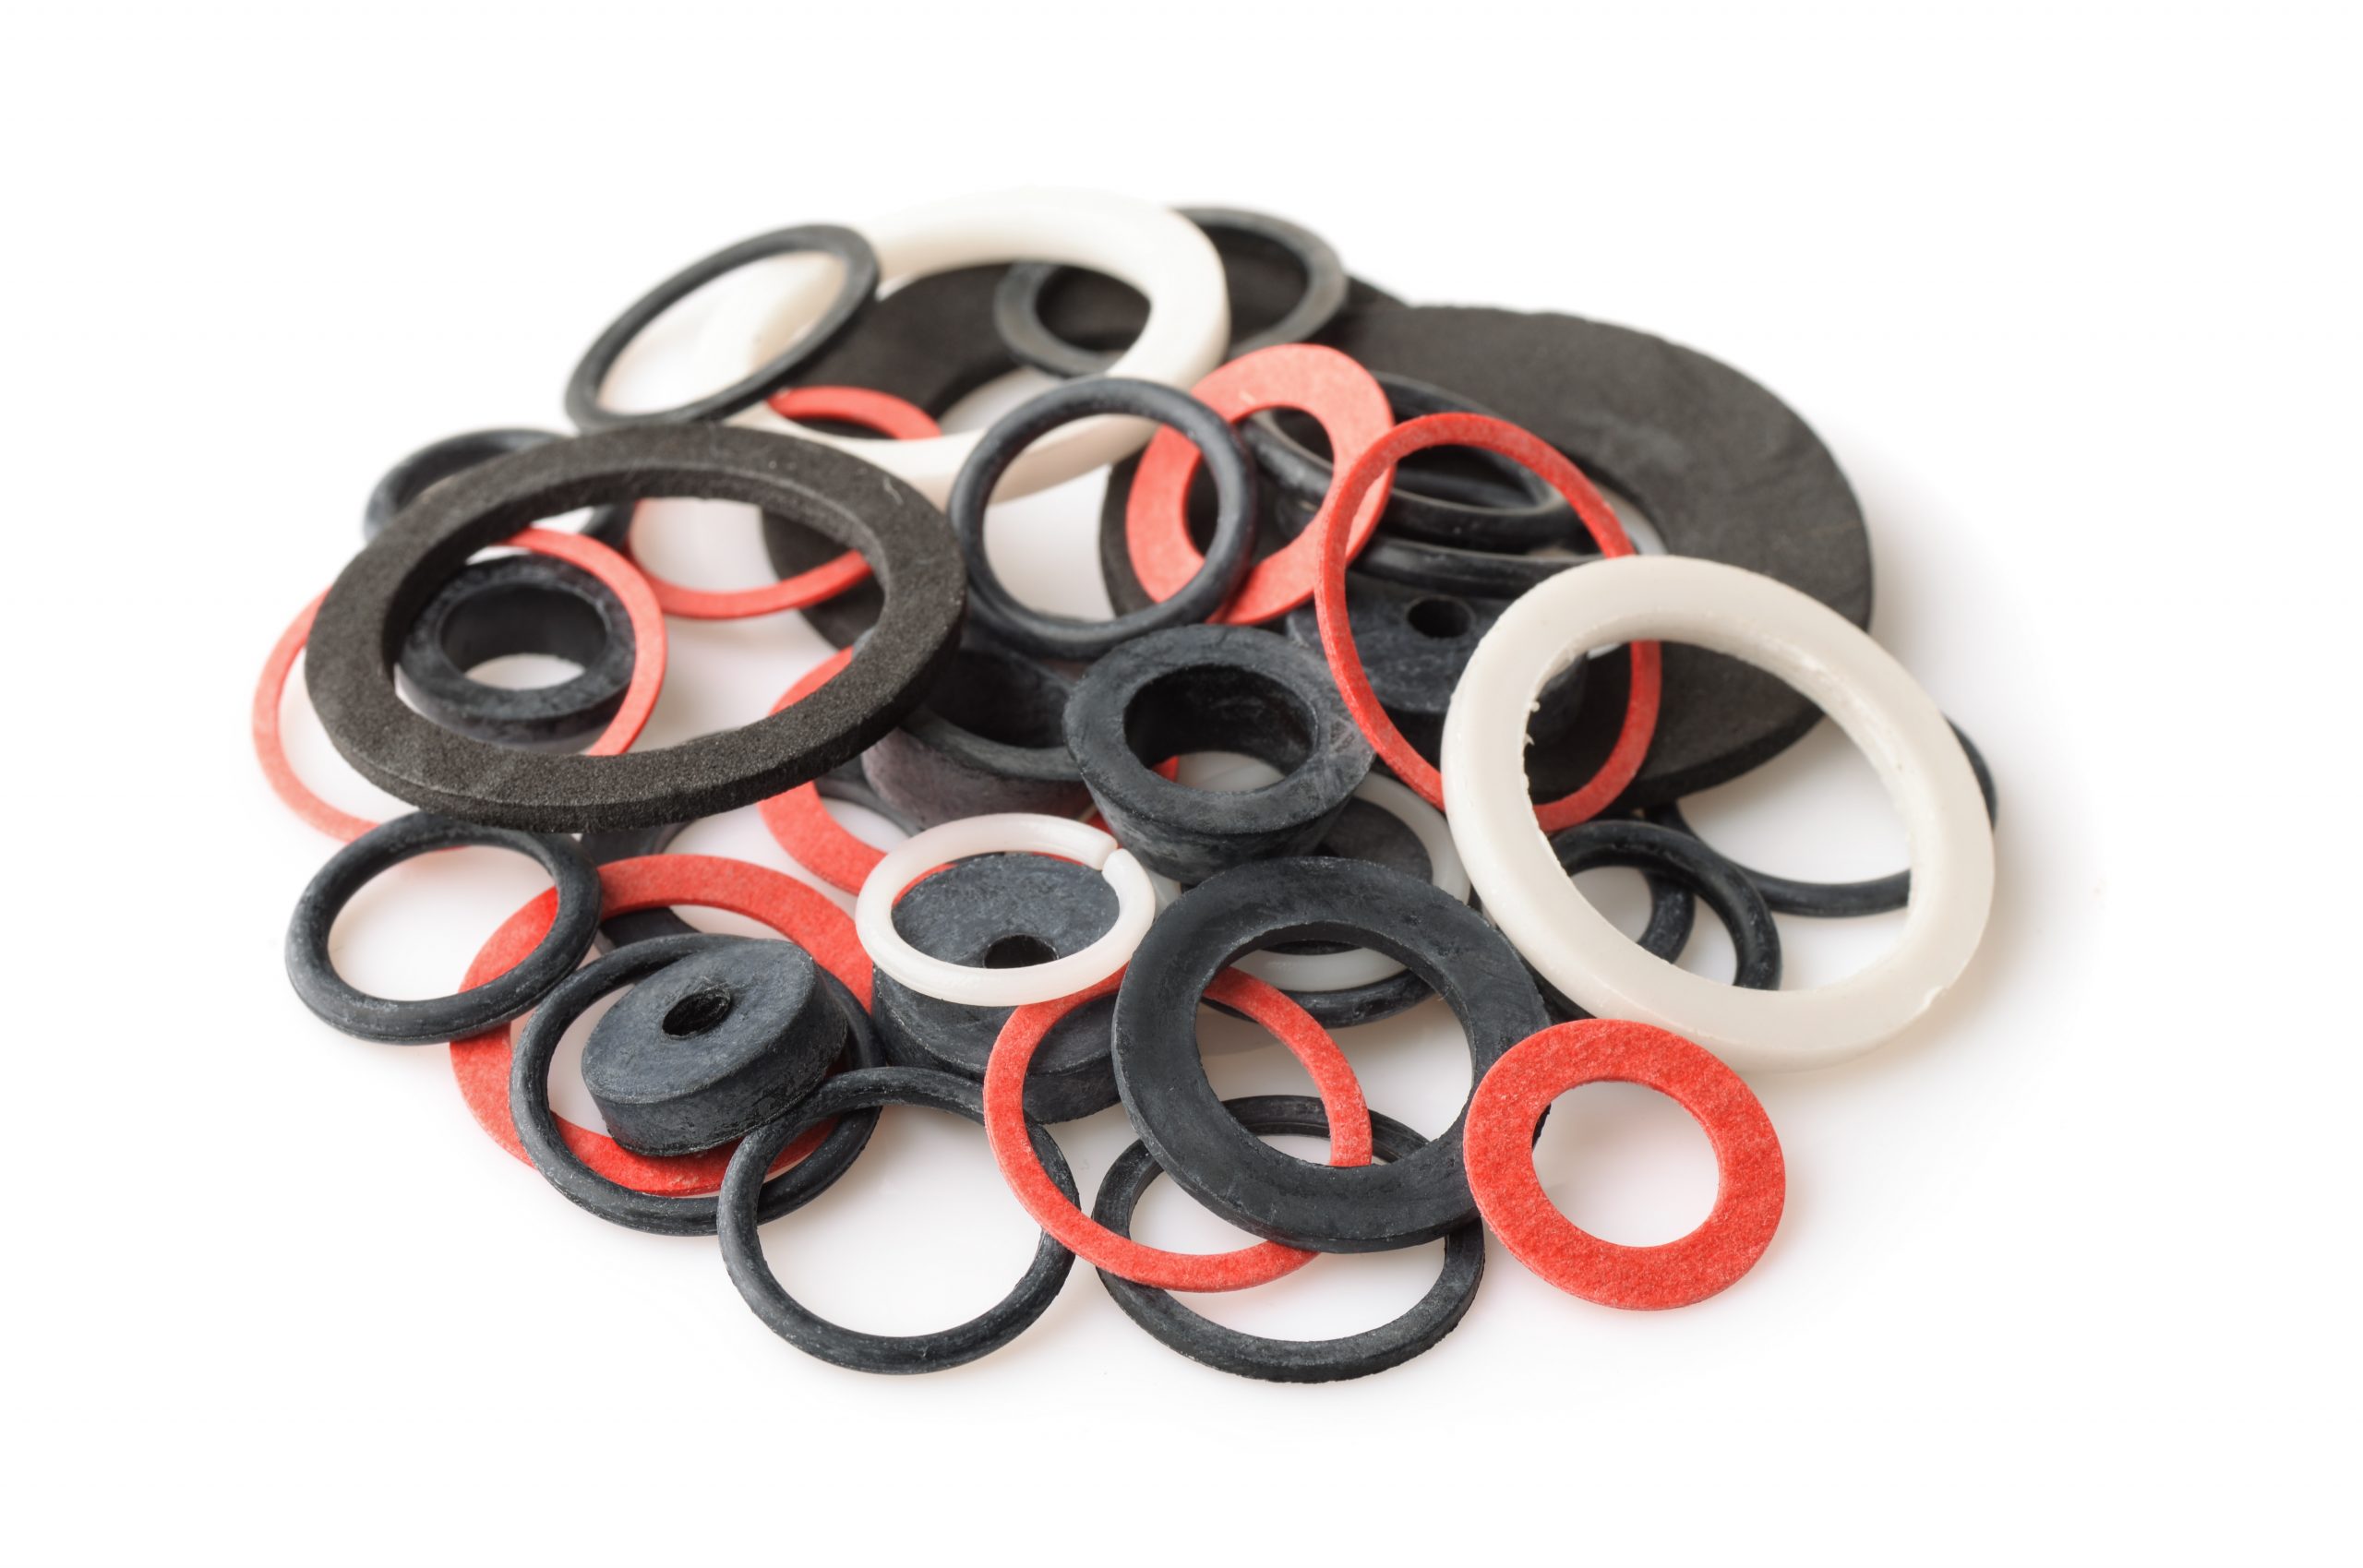 Nitrile vs. Neoprene: Which Rubber Material Is Best?